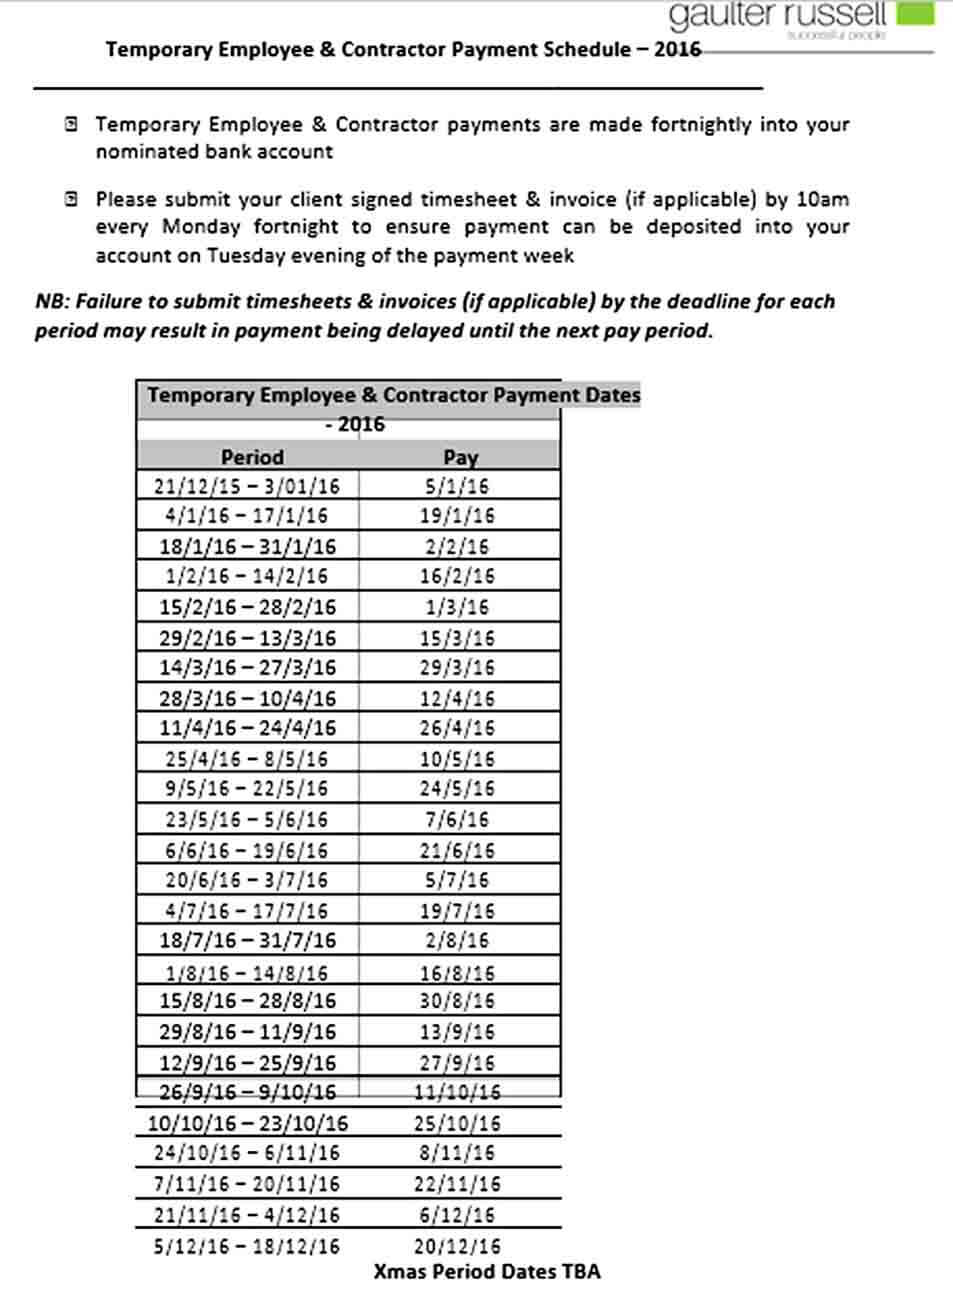 Temporary Contract Payment Schedule Template